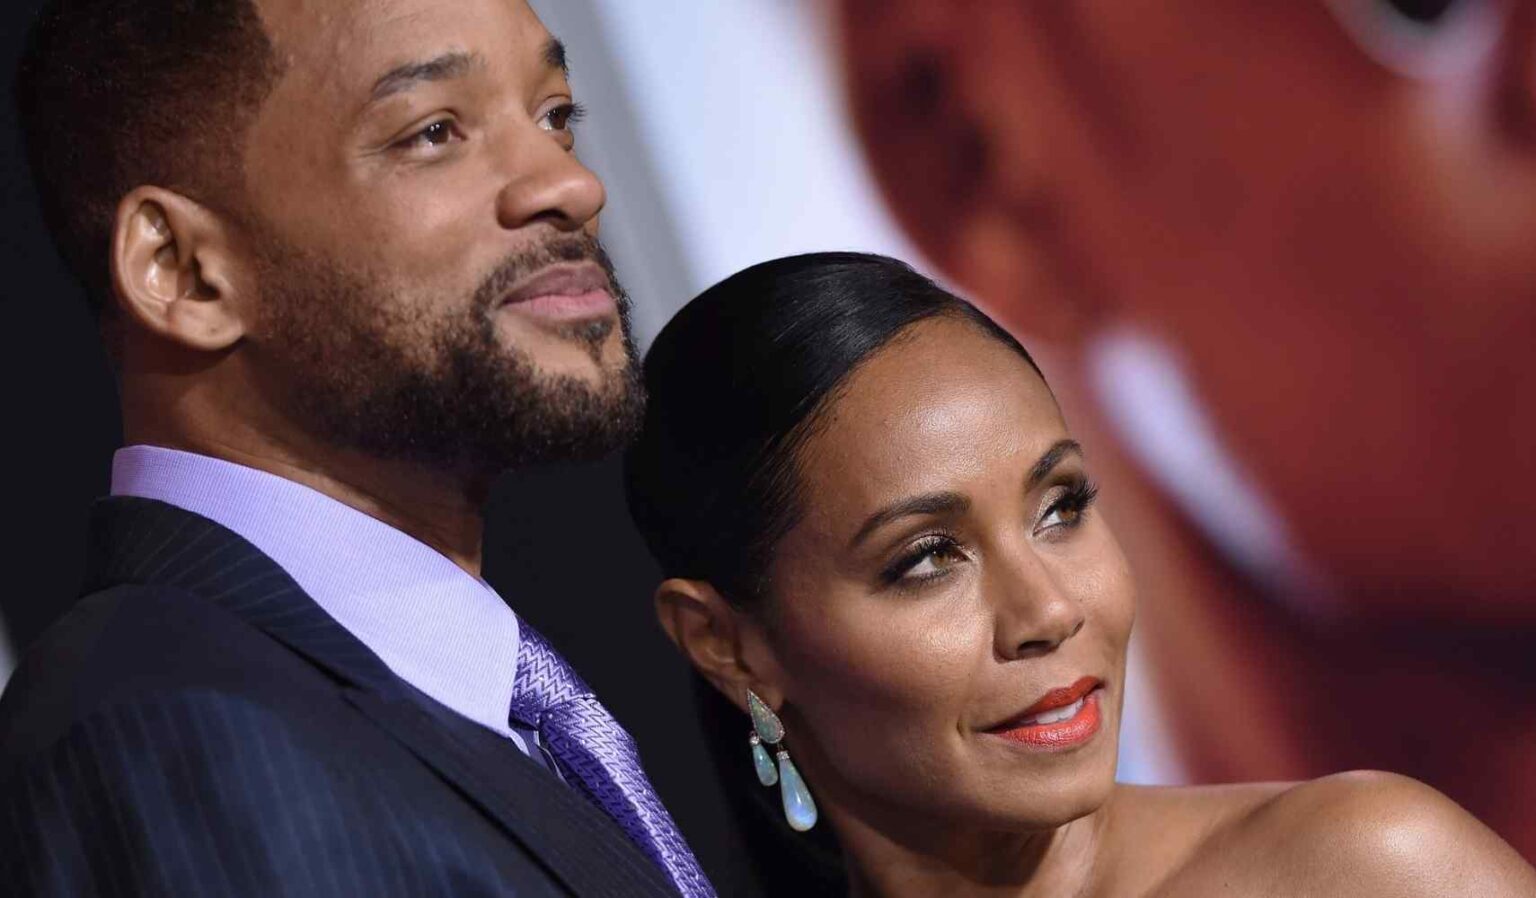 Will and Jada Pinkett Smith's rocky marriage has been publicized for years but they're still going strong. Did they become swingers to save their marriage?